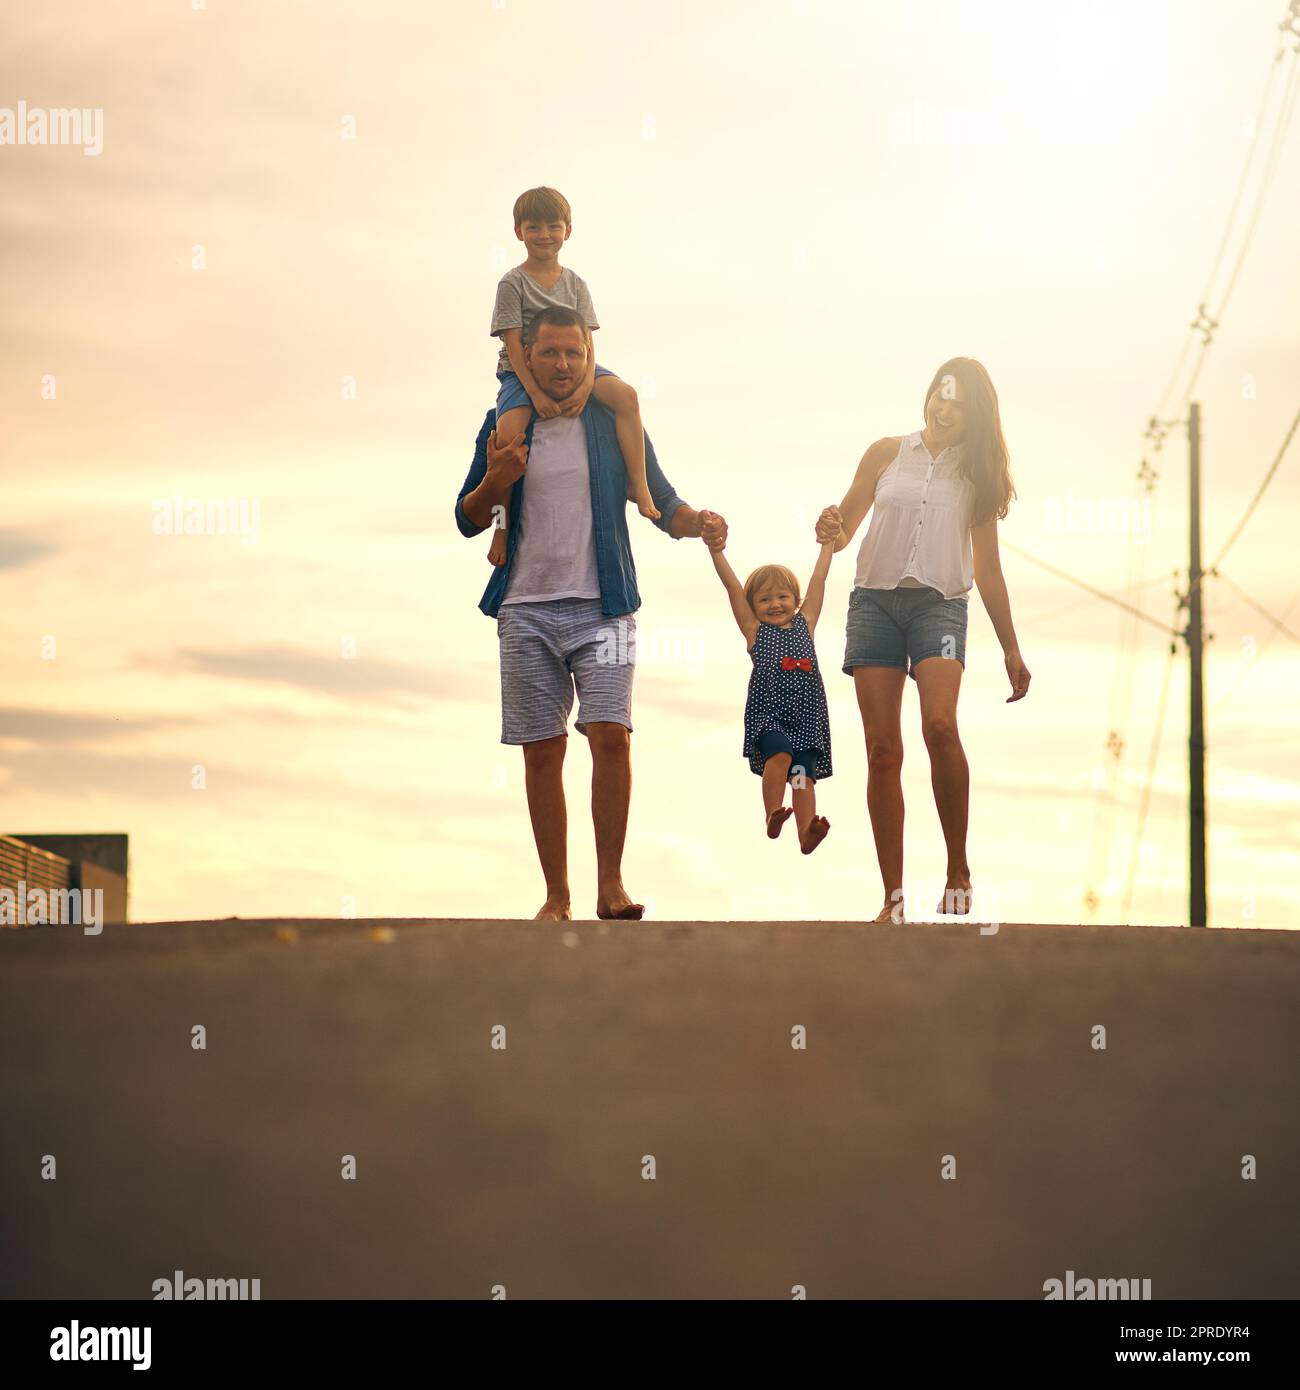 Walking through the neighbourhood as a family. a young family taking a walk down the road outside. Stock Photo